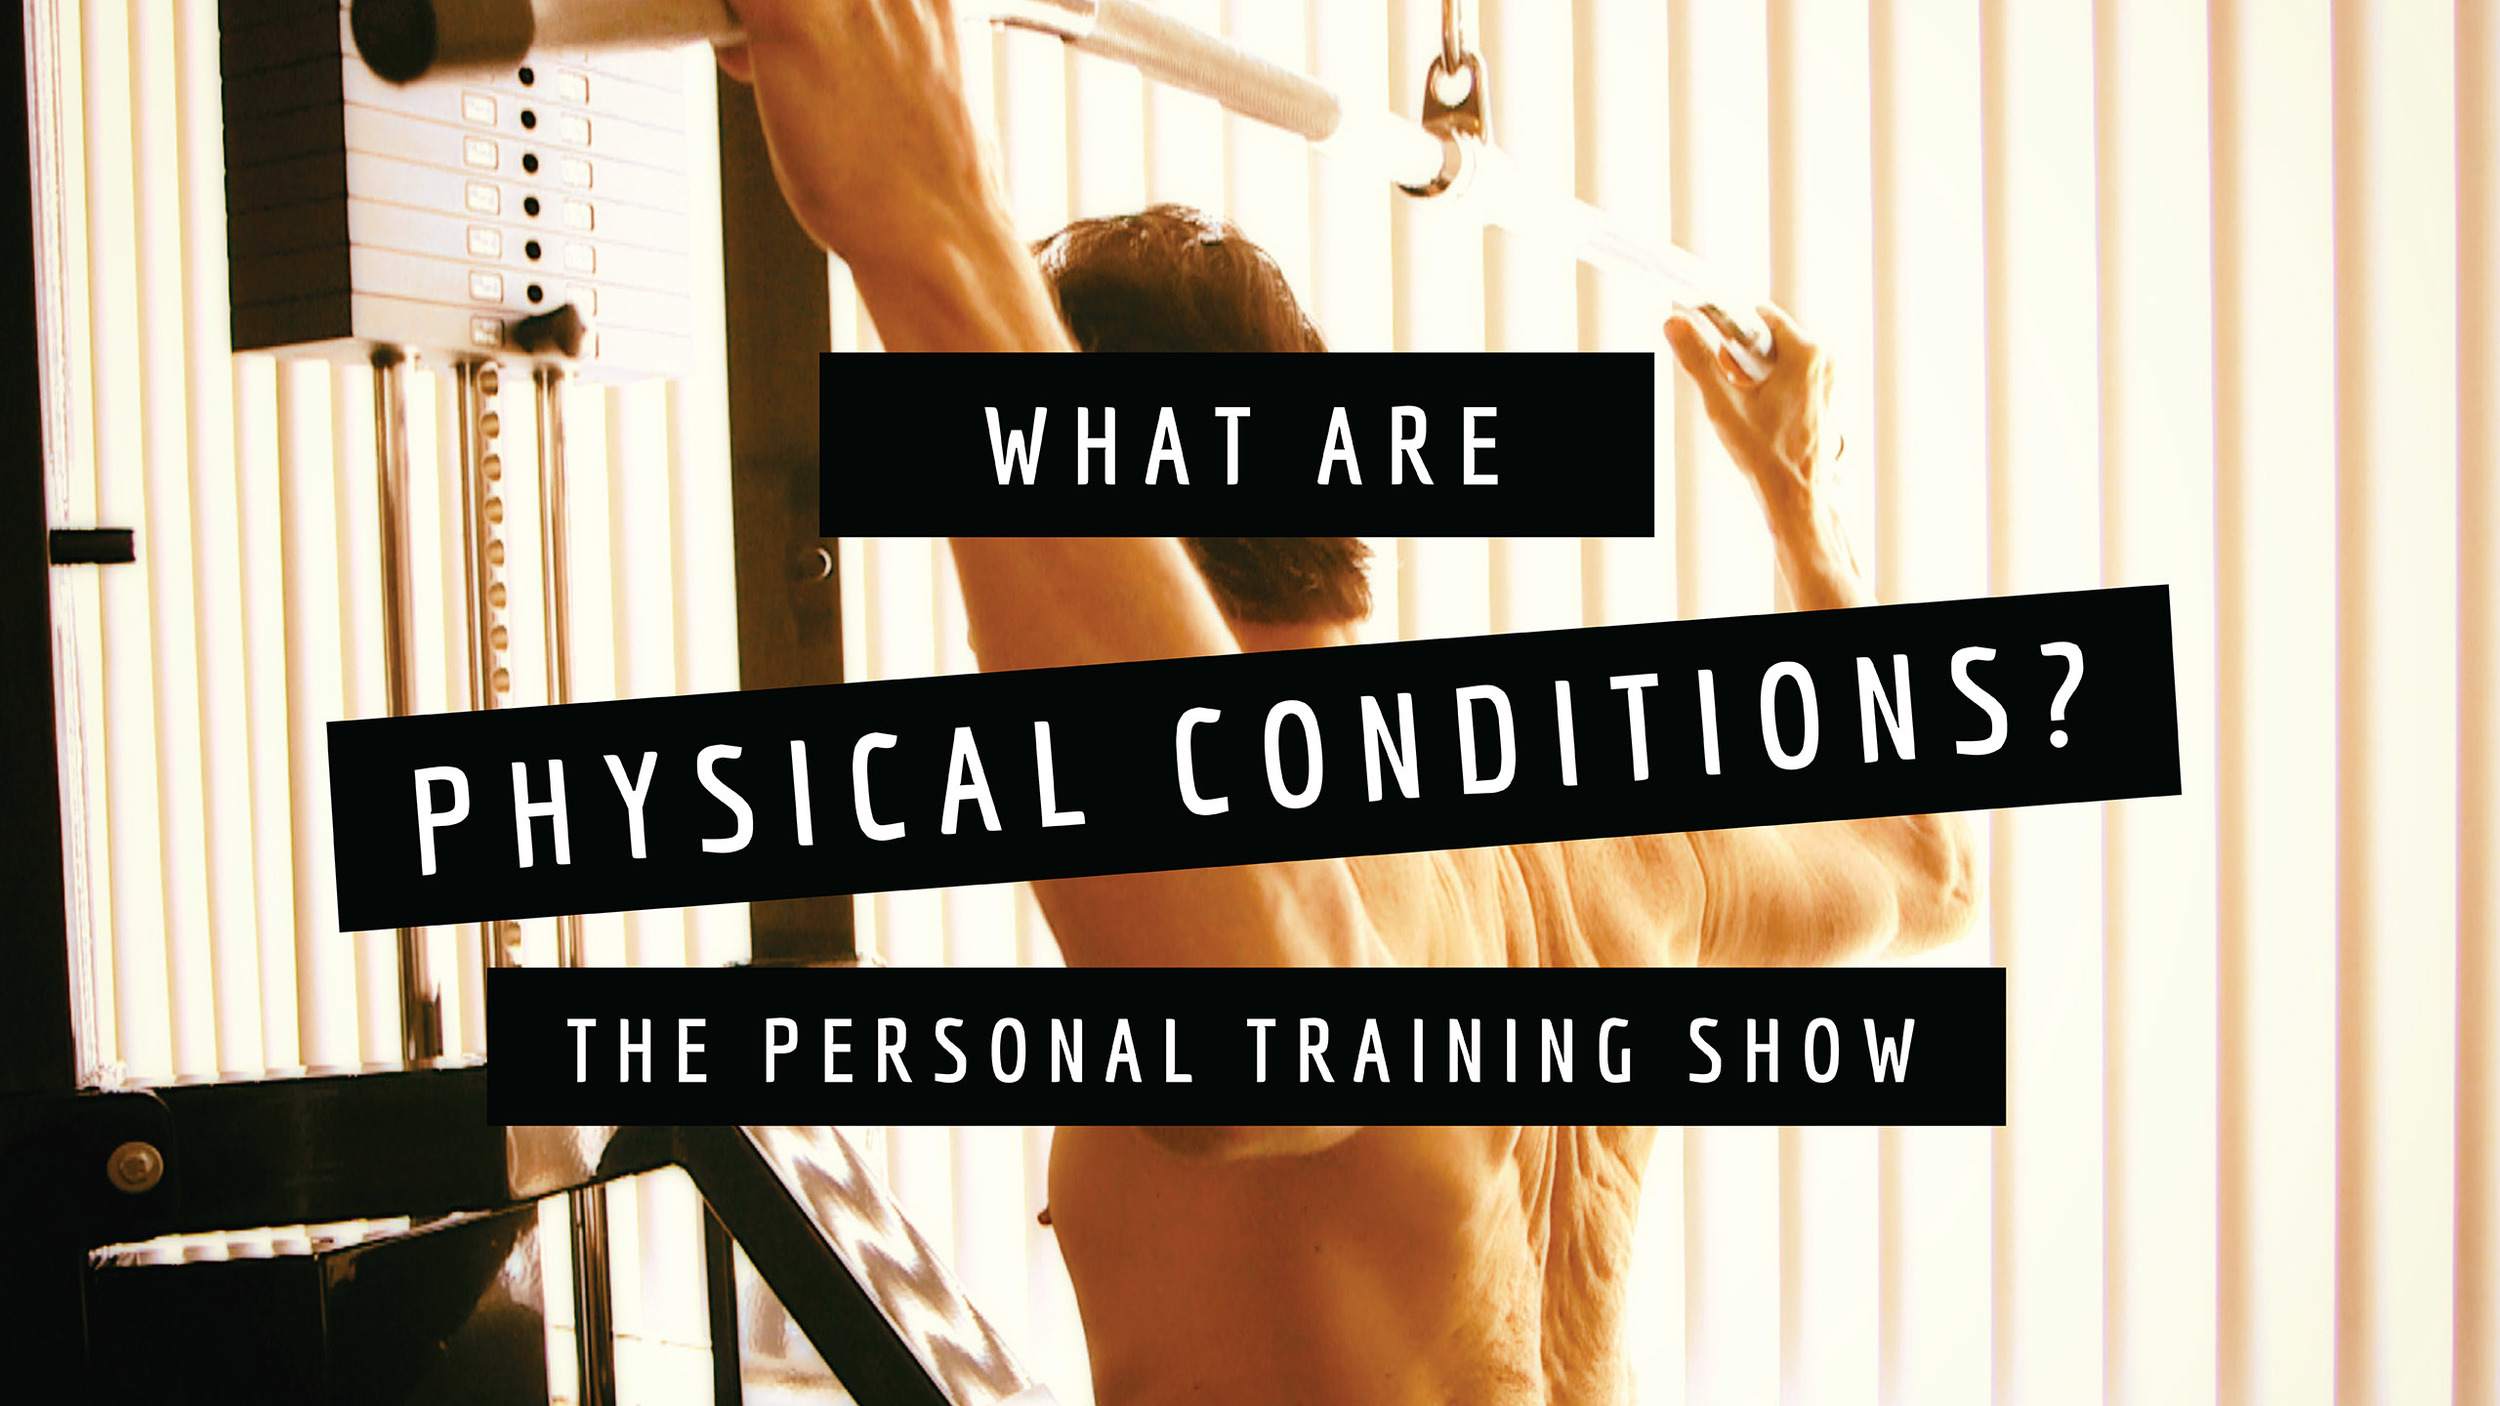 What Are Physical Conditions?